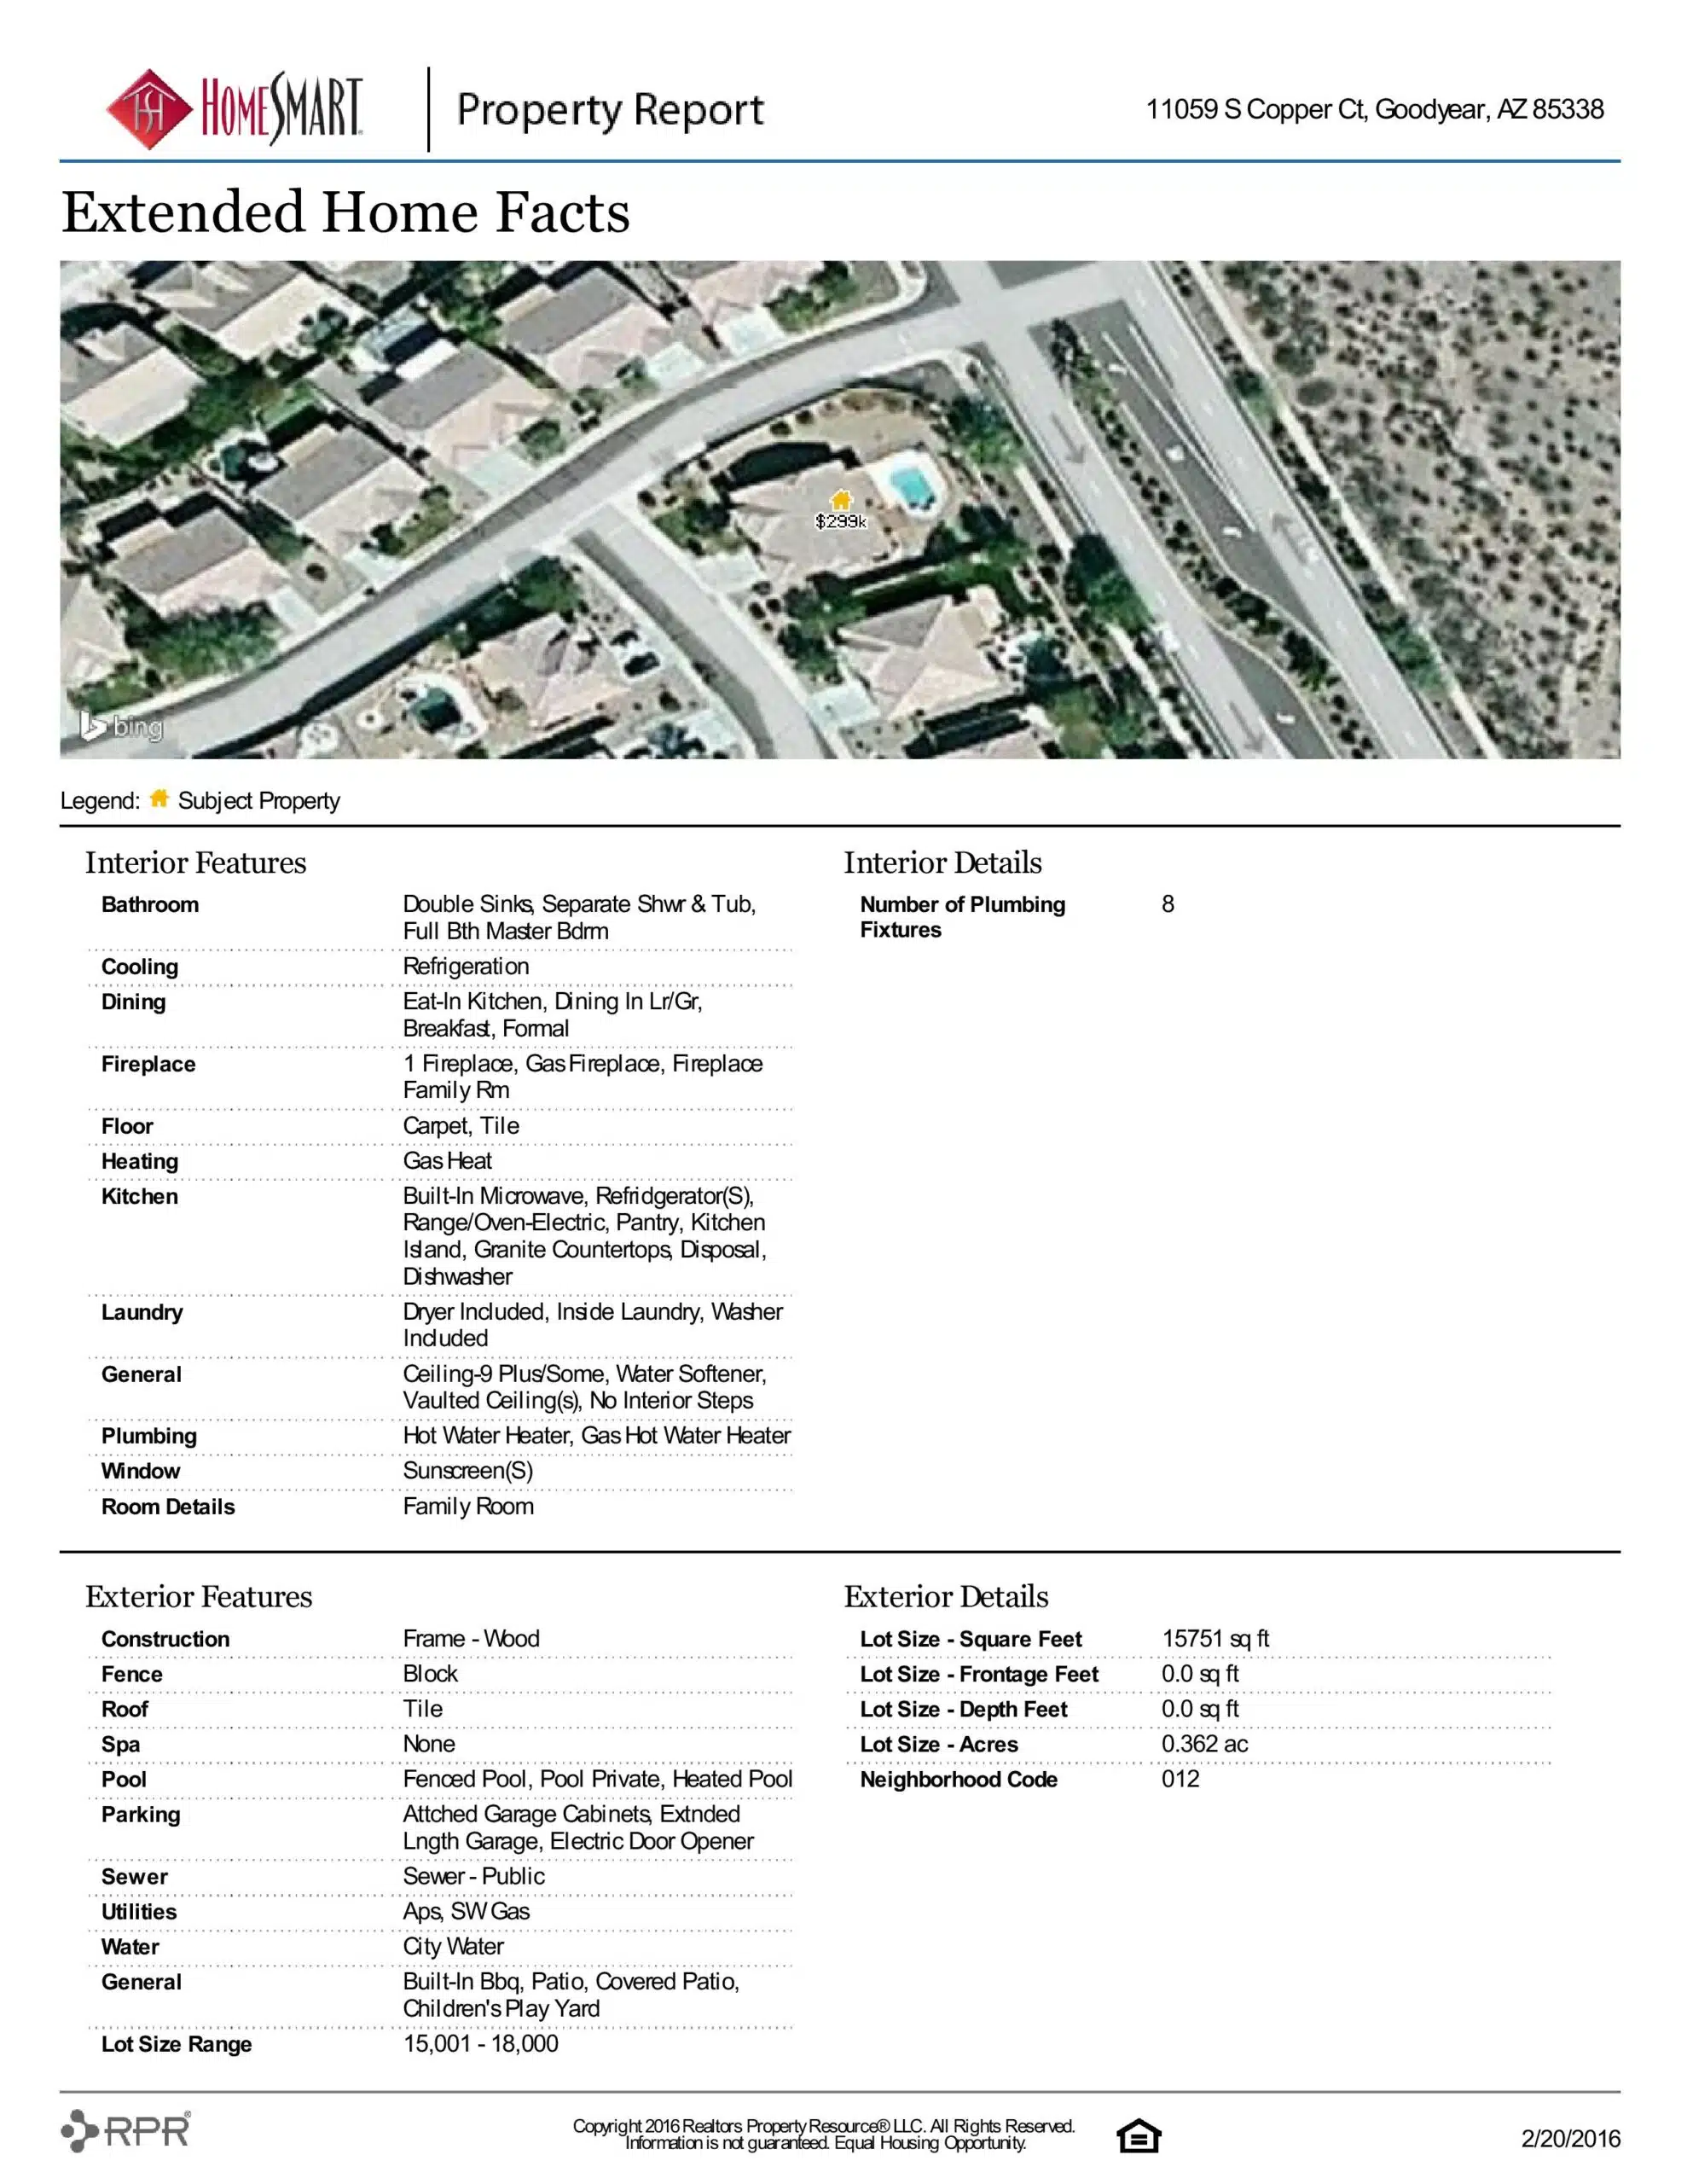 11059 S COPPER CT PROPERTY REPORT-page-004